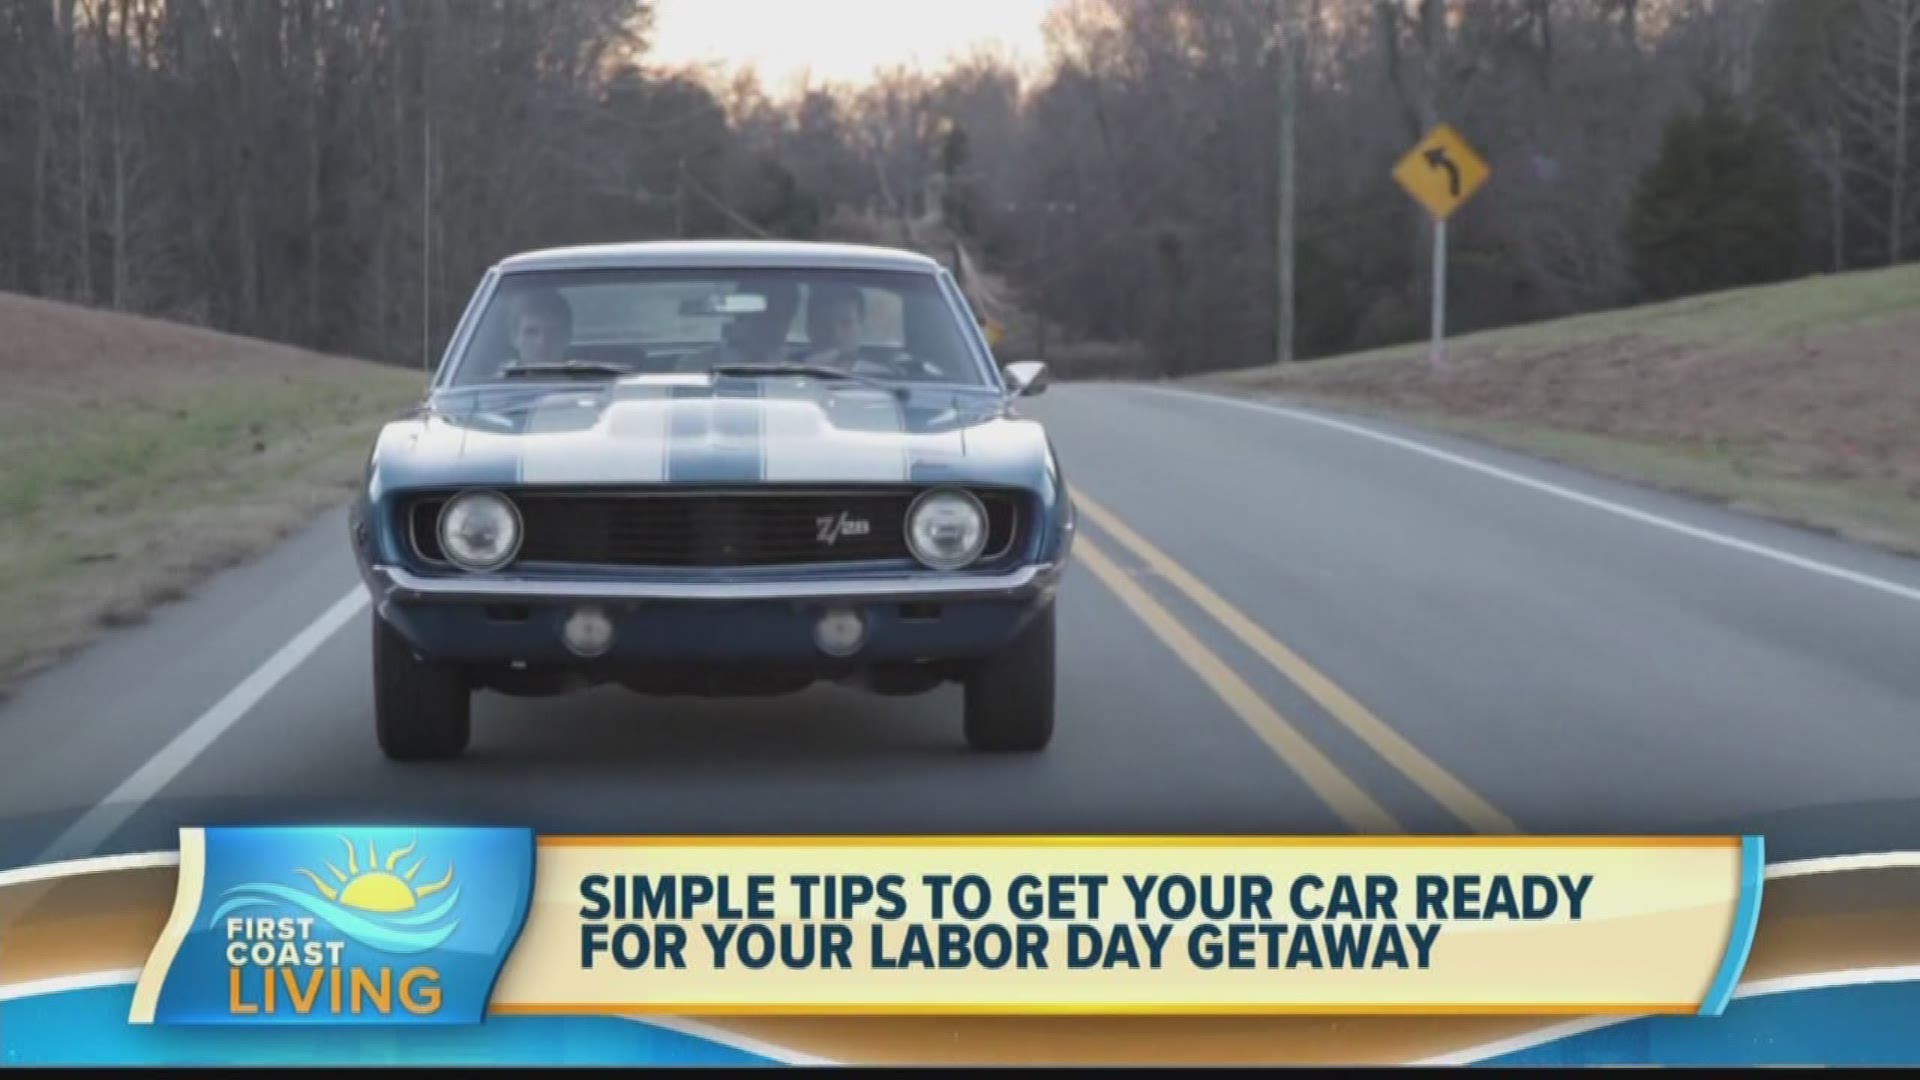 Take a look at these tips to make sure your car is ready.